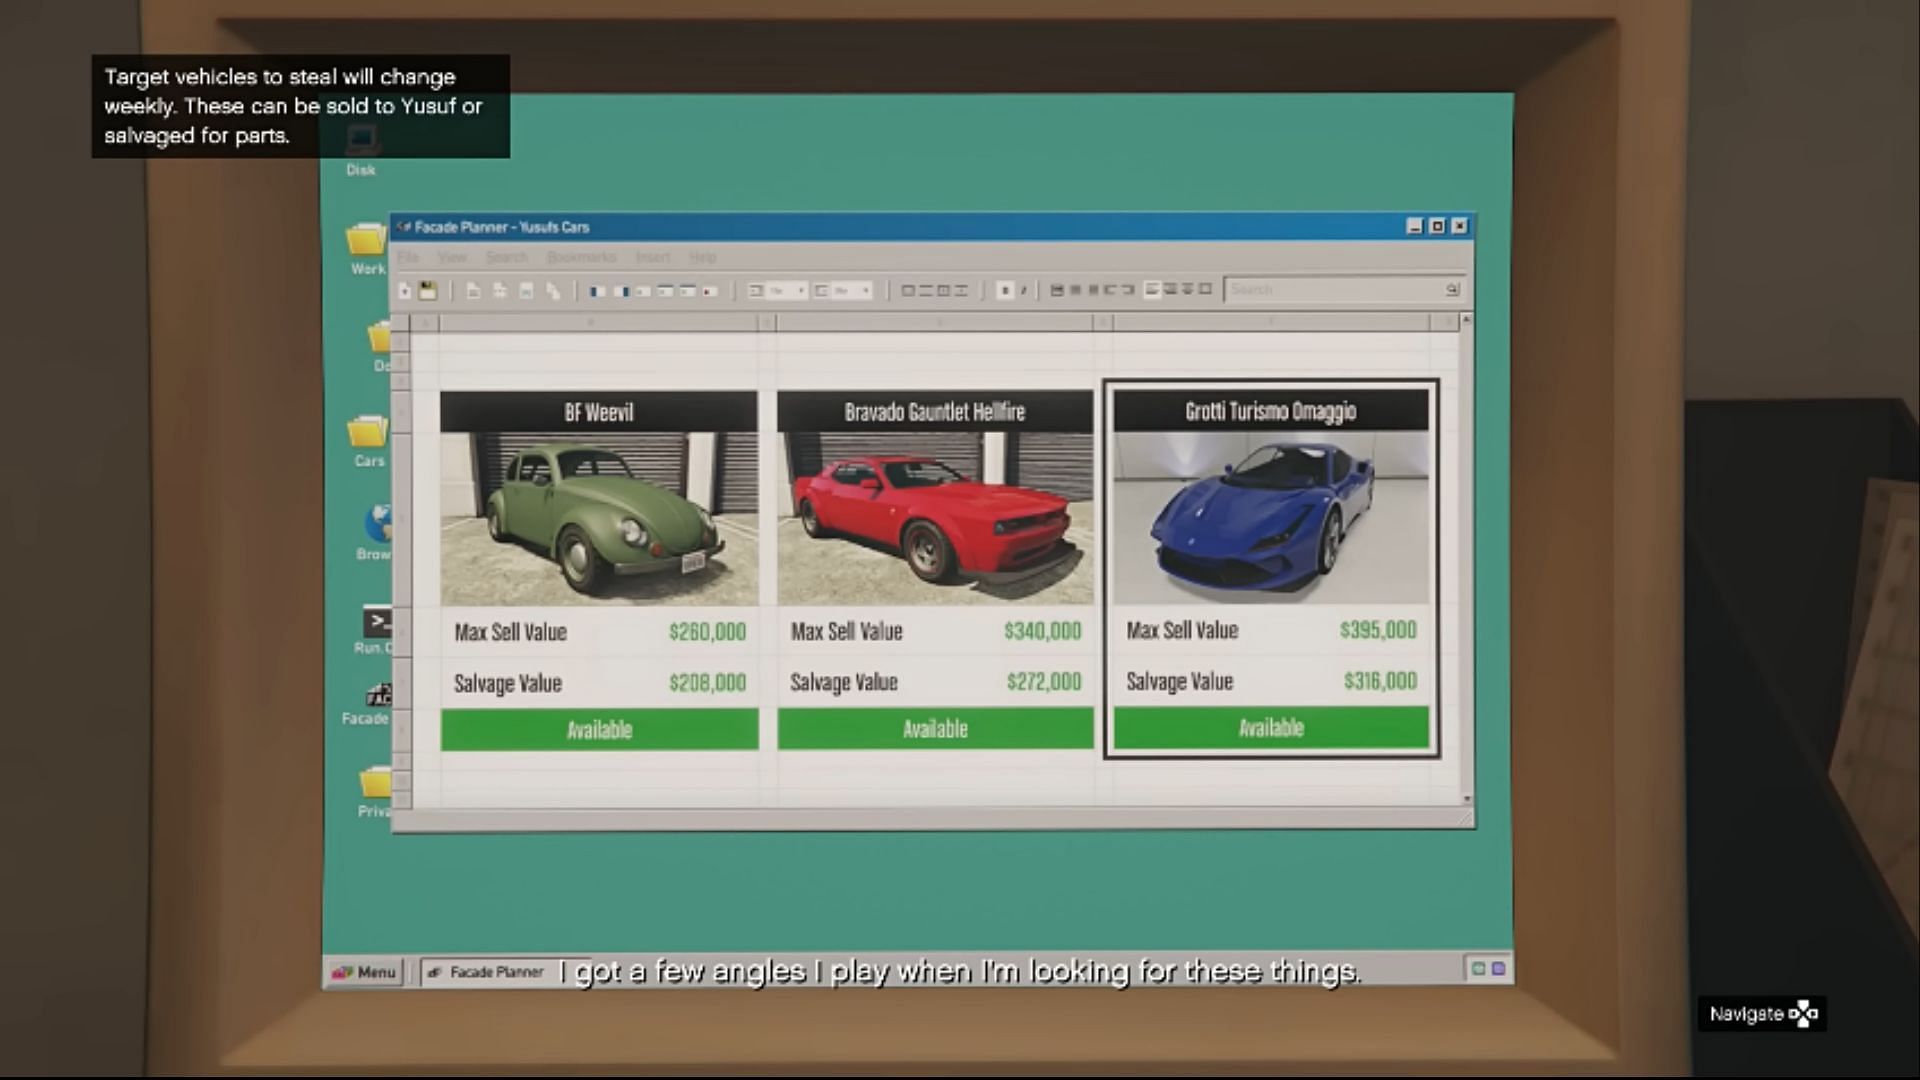 GTA Online Vehicle Robberies can be started from the computer inside the property (Image via YouTube/TGG)